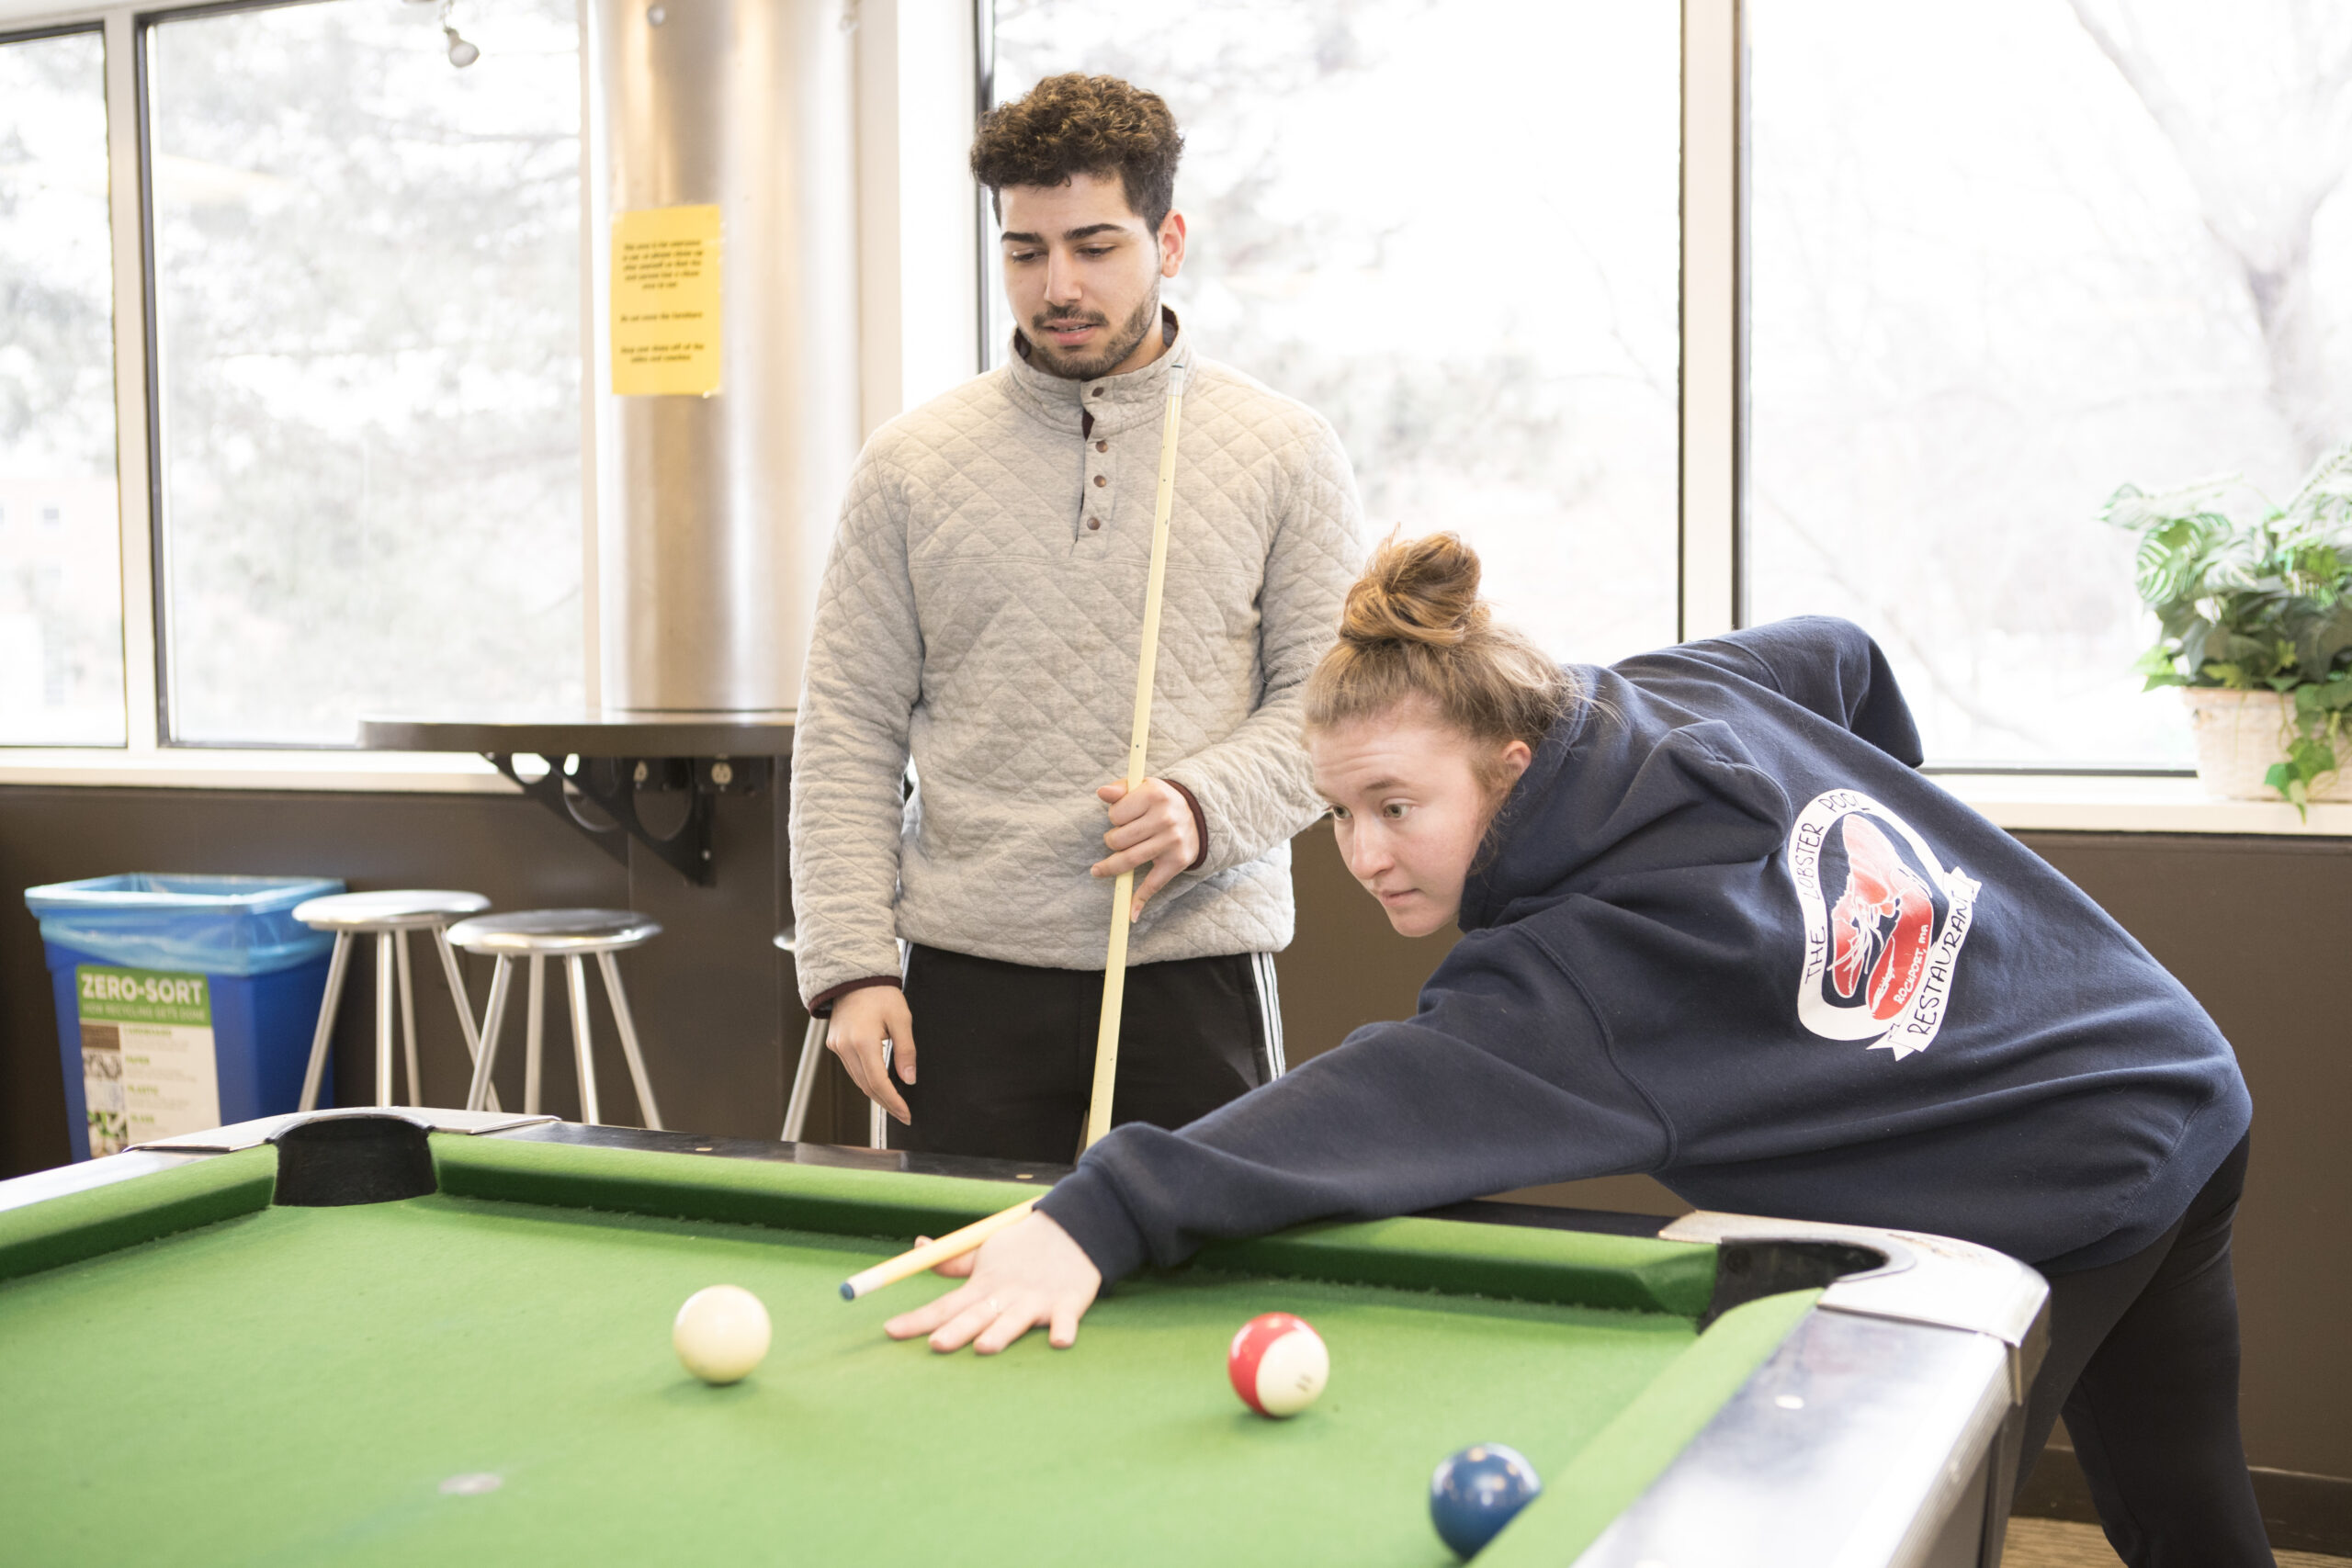 2 Worcester State students playing pool in one of the residential communal lounges on campus